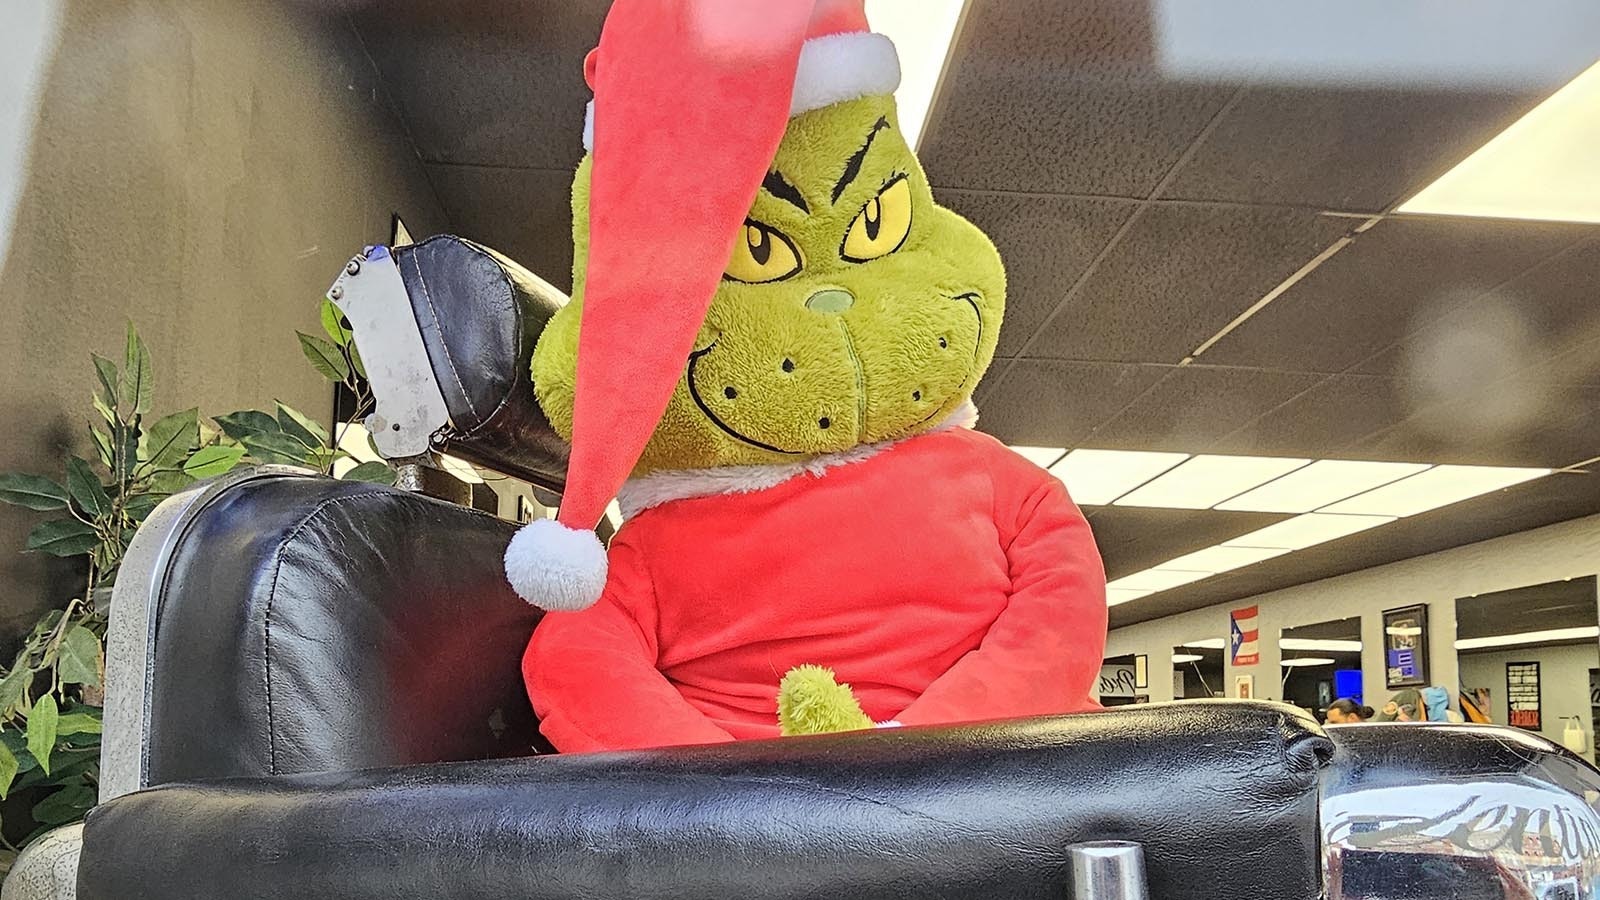 Inflation has been a Grinch for many families who don't fit the typical programs that help at this time of year. That had them worried there would be no Christmas for them this year. But the Grinch was foiled once again, thanks to an impromptu Christmas drive at The Presidential Barbershop.